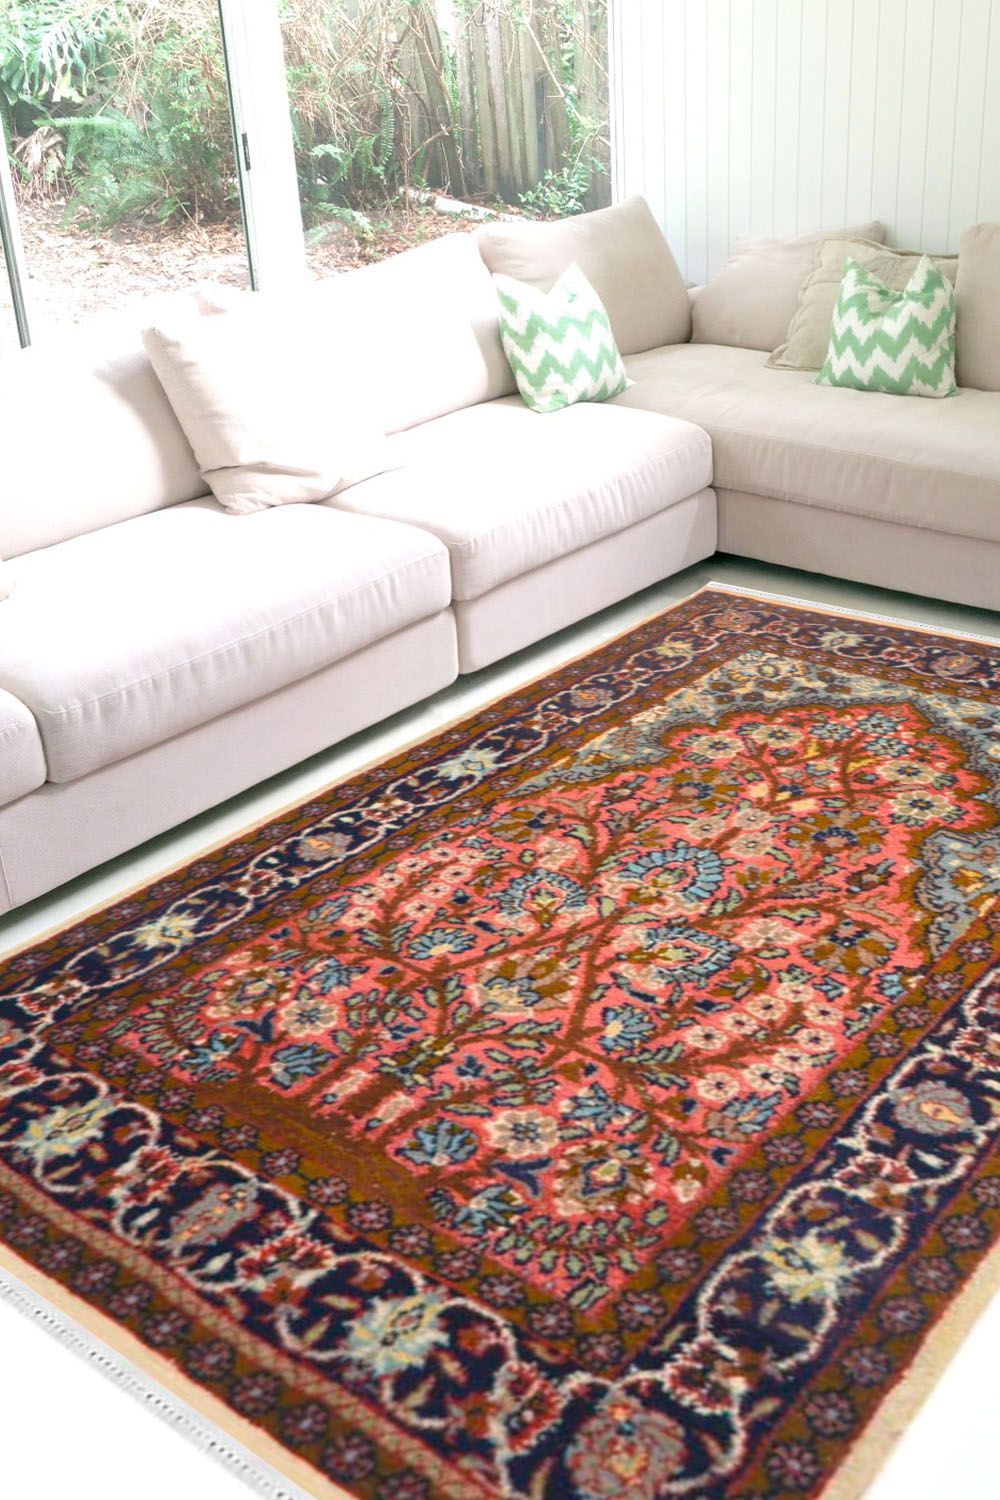 Jaal Tree of Life Rug online at an amazing price from Rugs and beyond